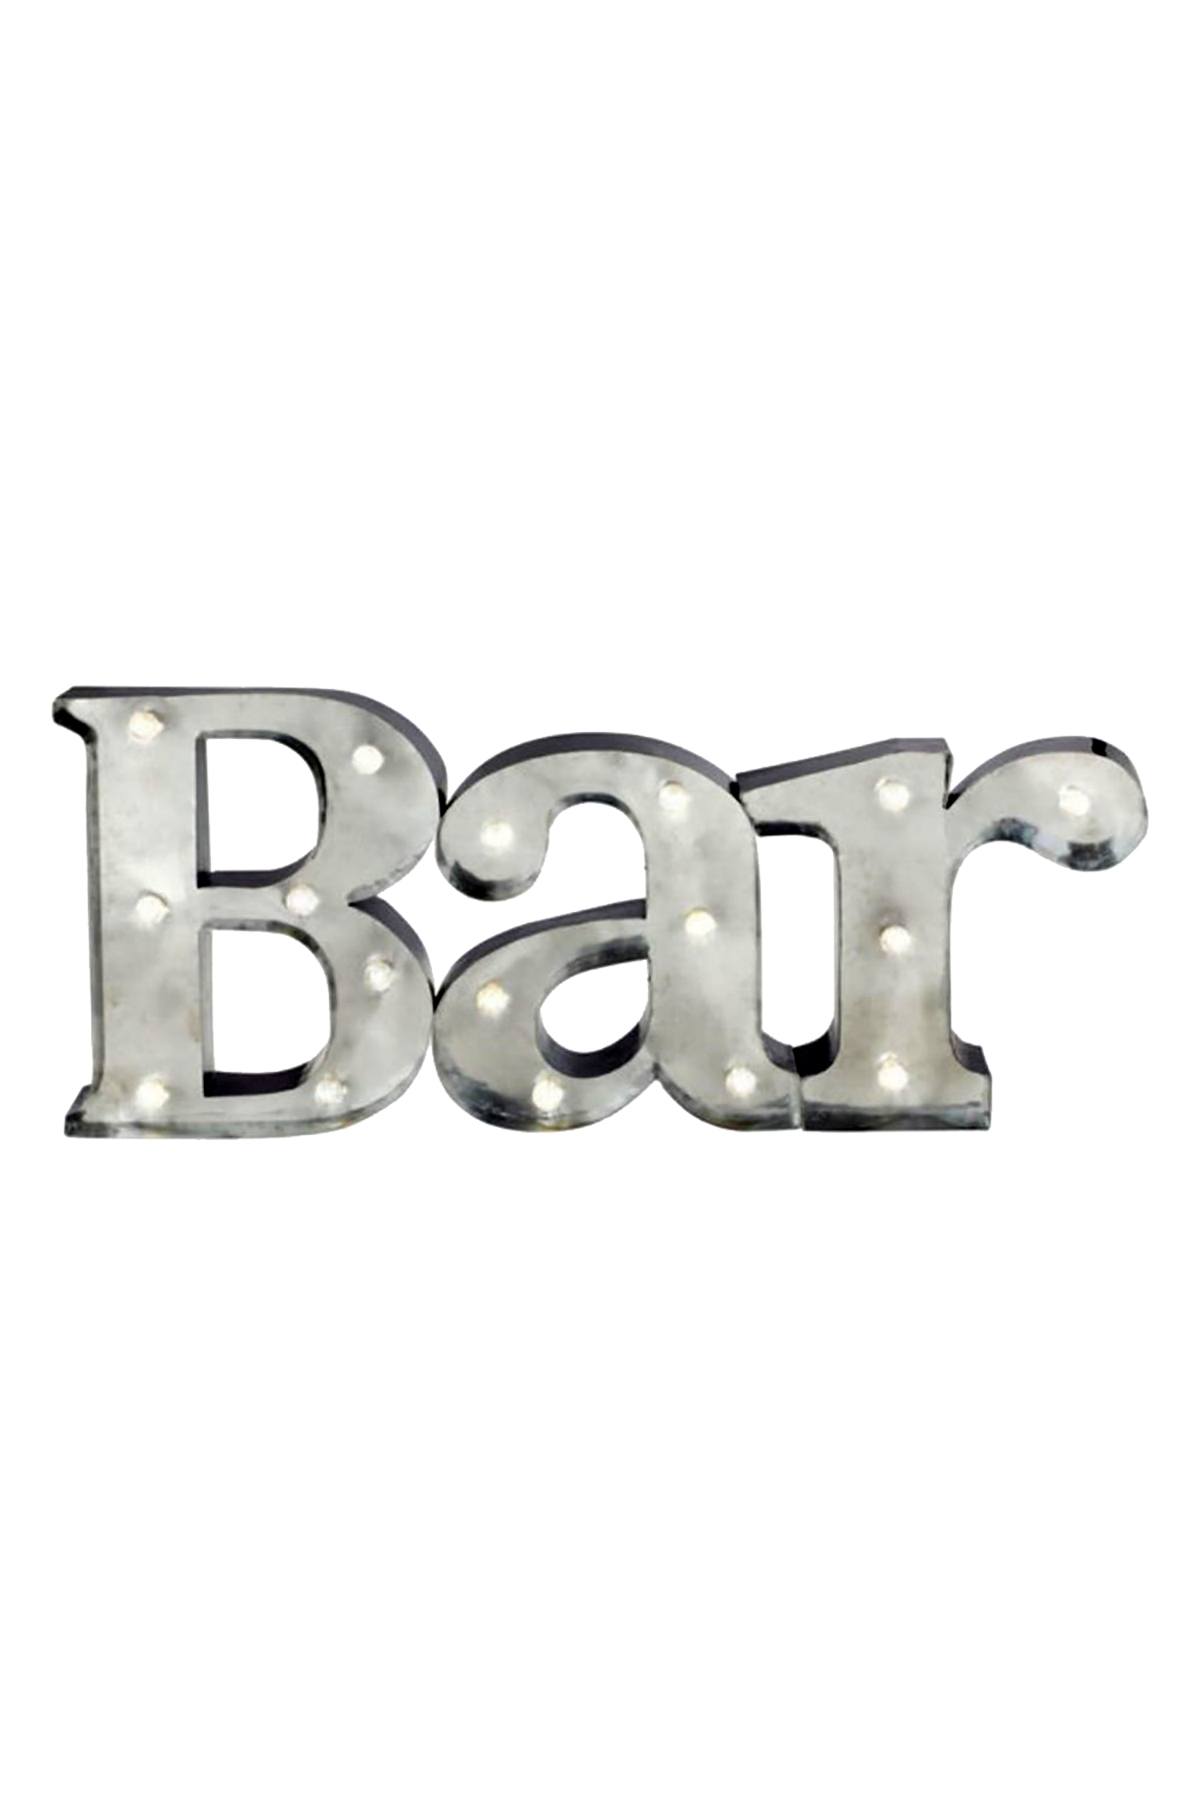 Shift3 Platinum Collection Silver BAR Rustic Finish LED Marquee Sign